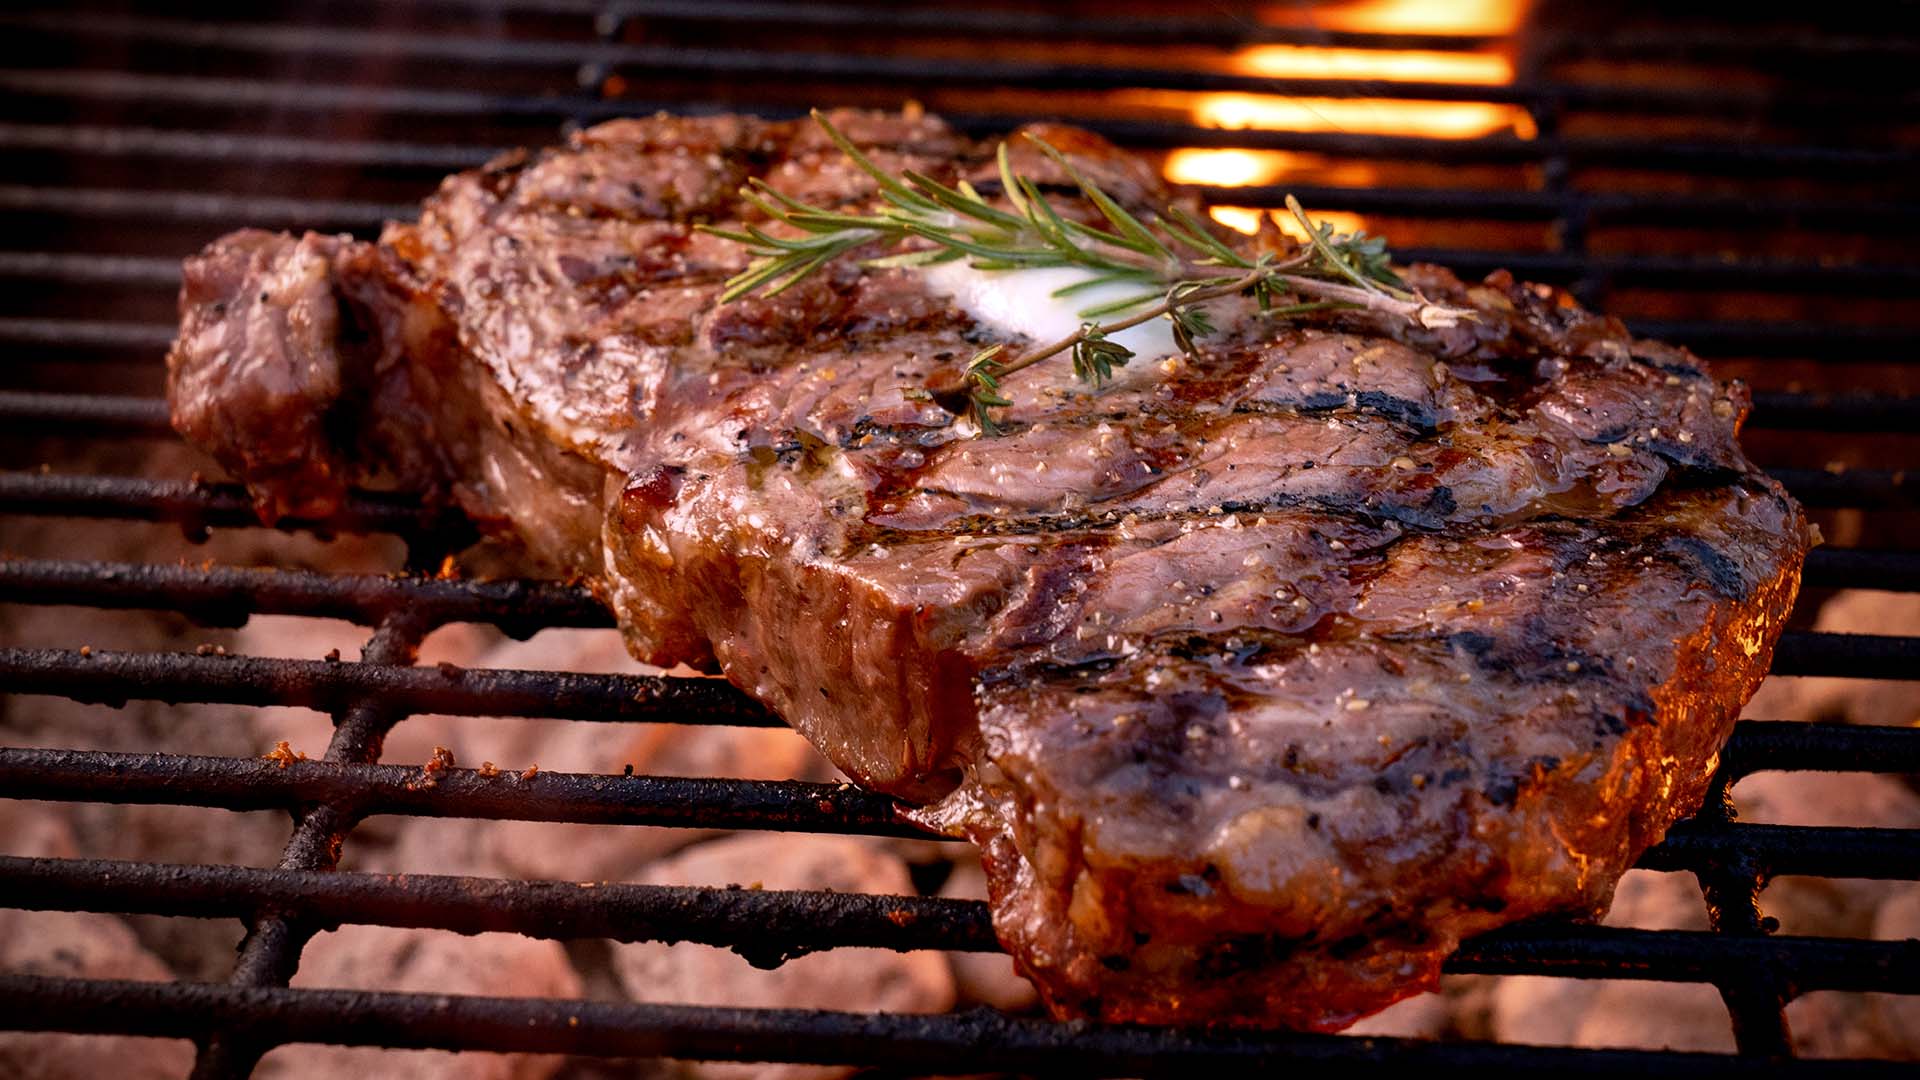 How To Grill Ribeye Steak On A Charcoal Grill - Recipes.net